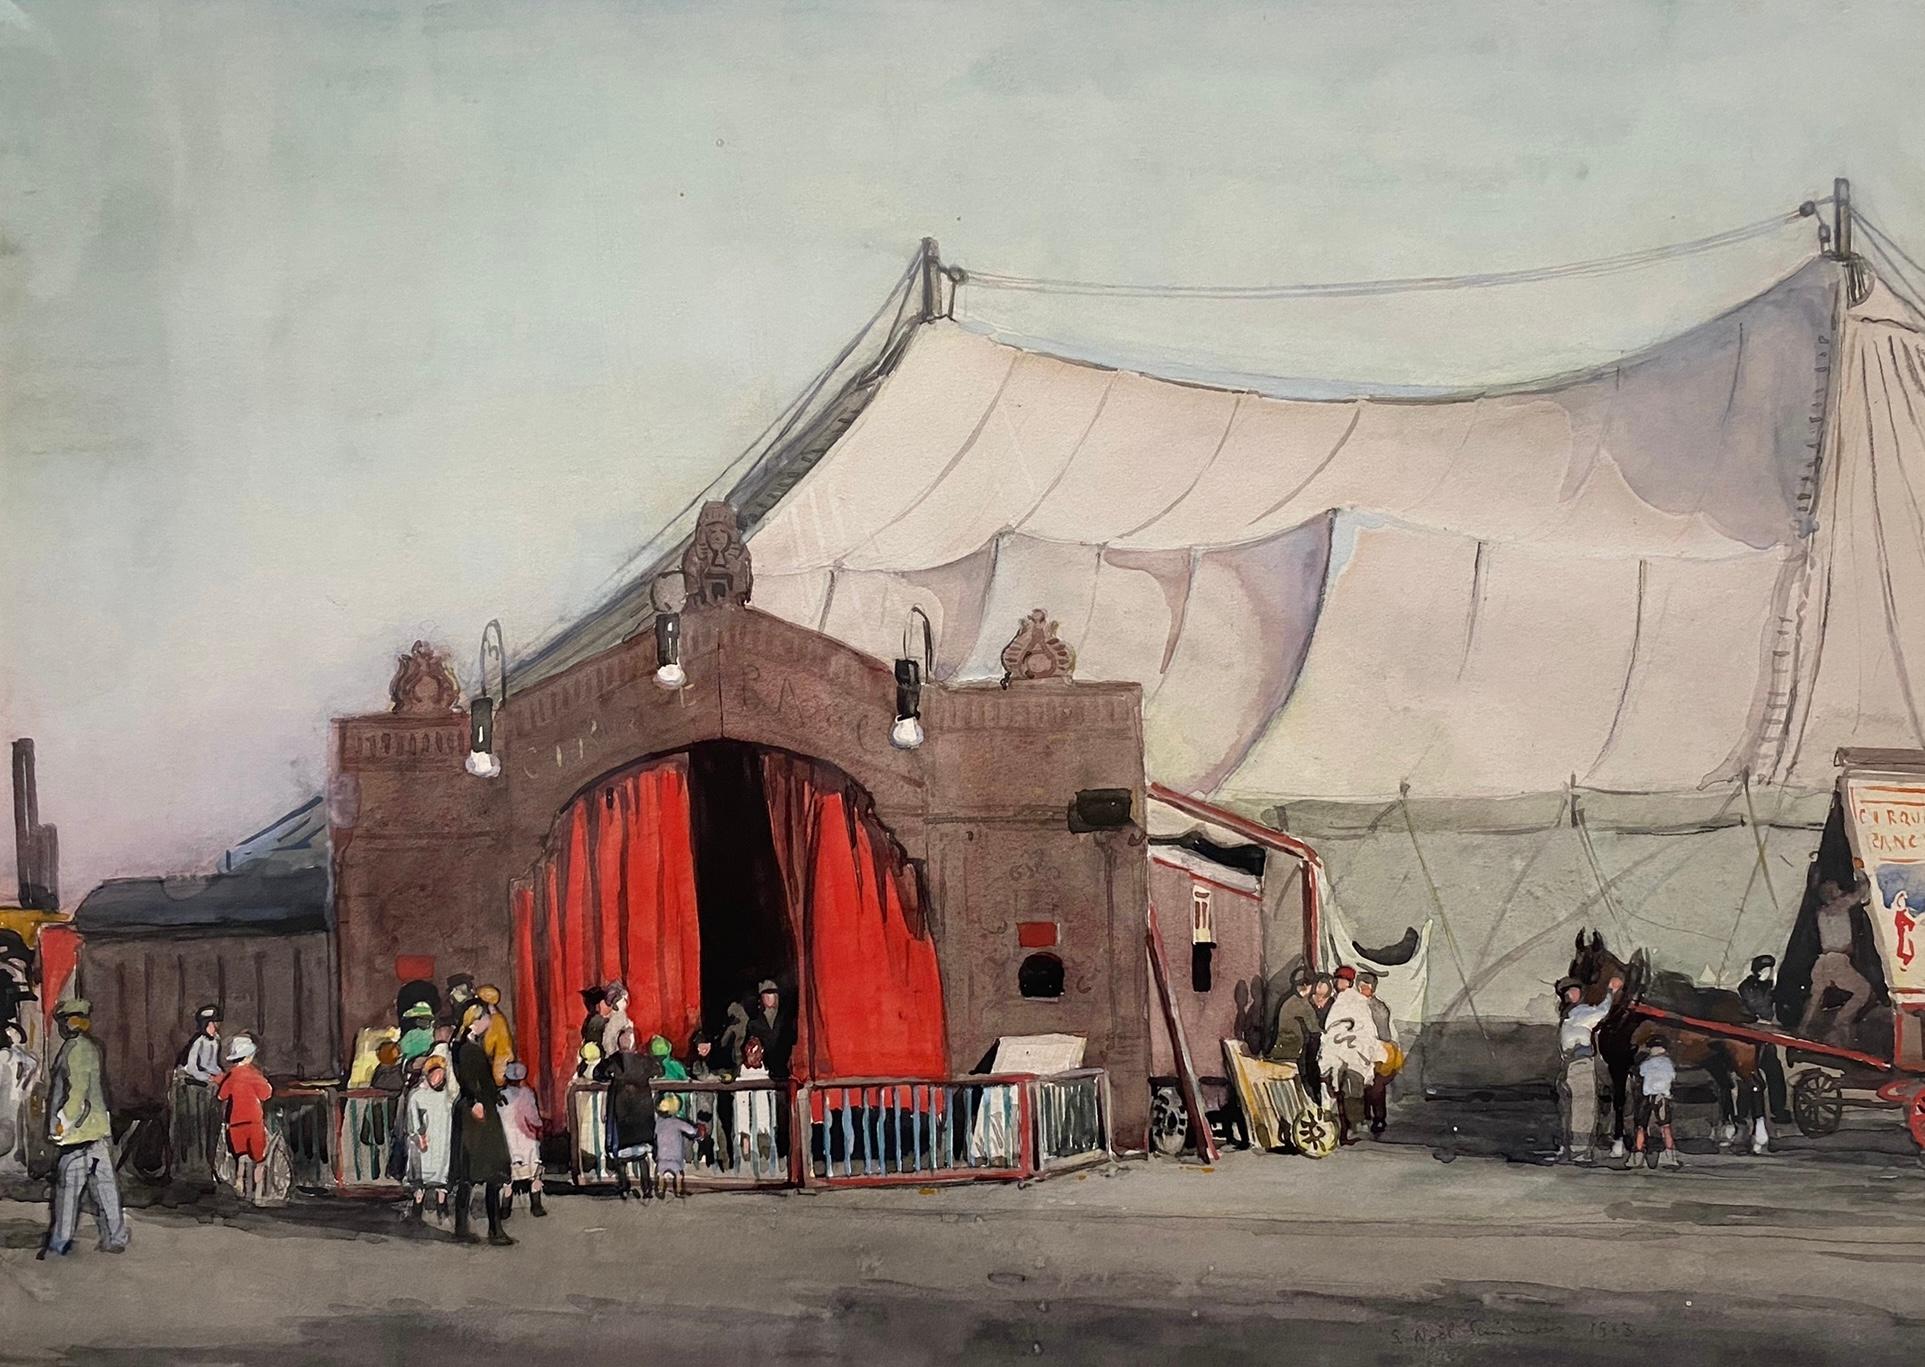 Sydney Noel Simmons Figurative Art - Cirque Rancy, Signed and Dated 1913 English Watercolour